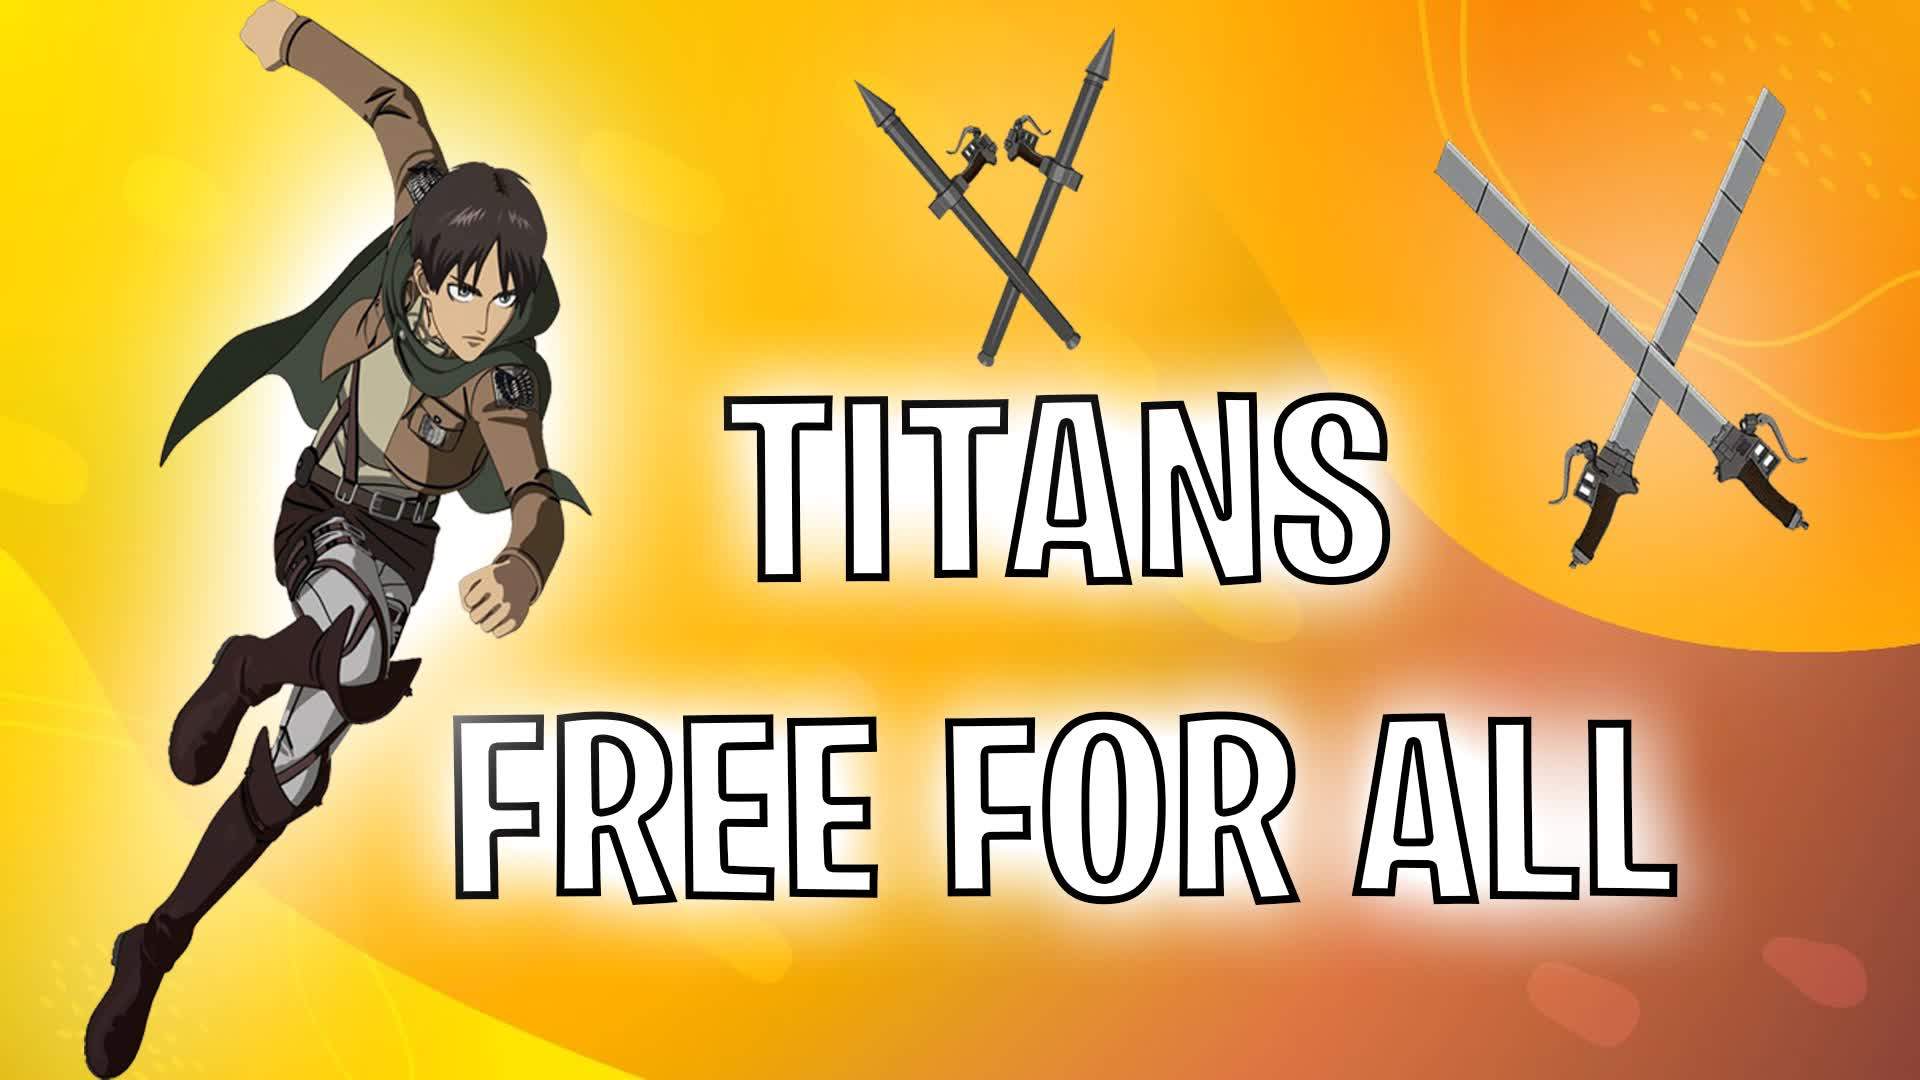 Titan's Free For All